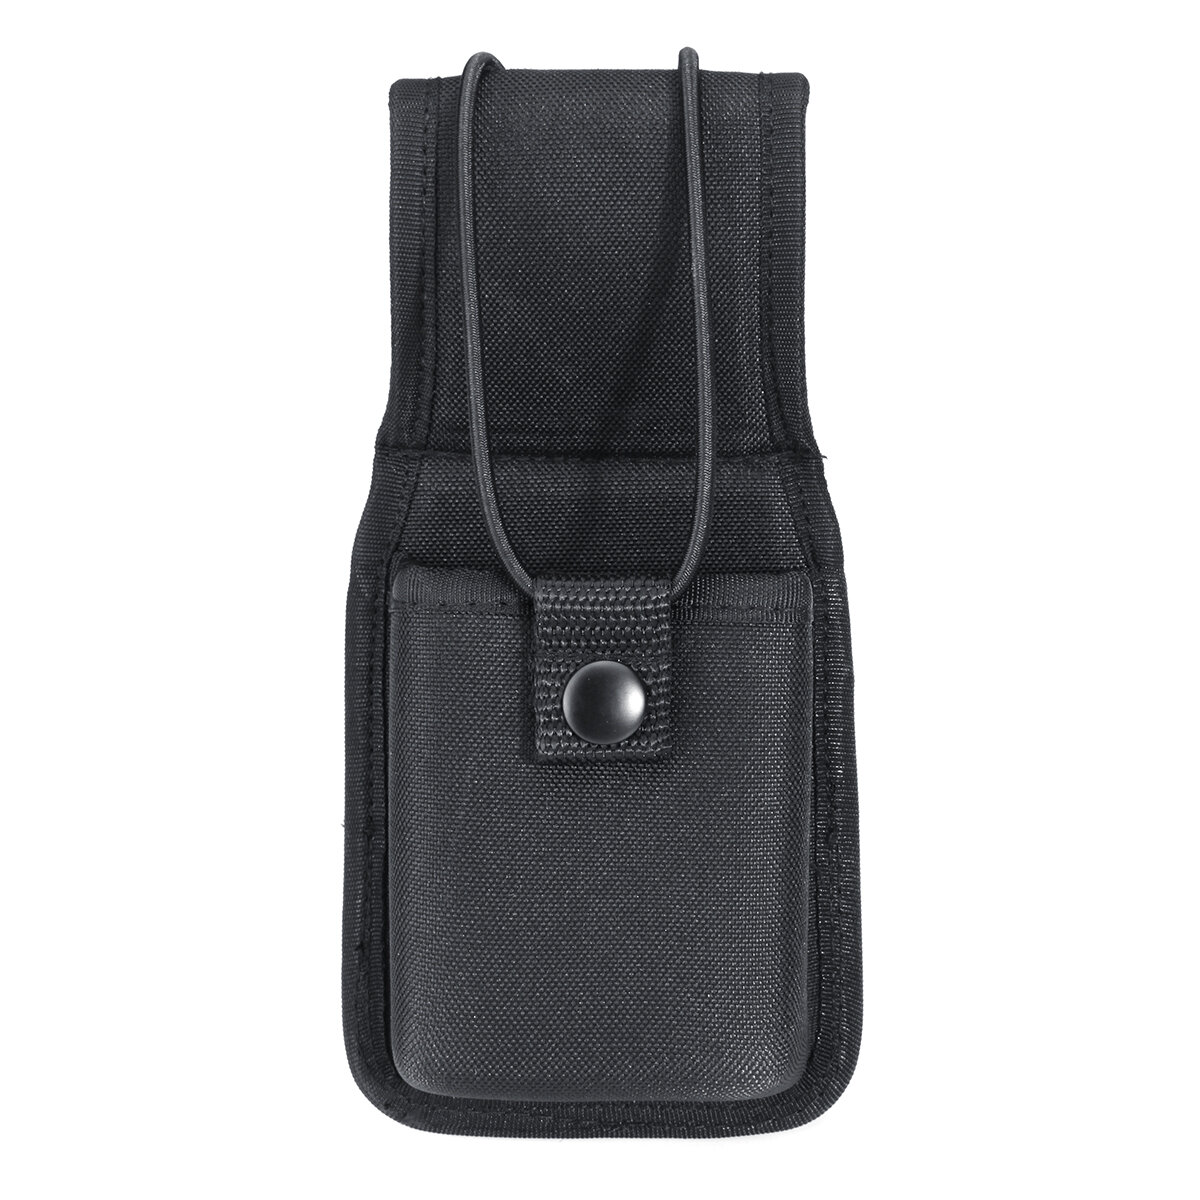 Universal Nylon Tactical Walkie Talkie Bag Mobile Phones Backpack Holder For BAOFENG Two Way Radio